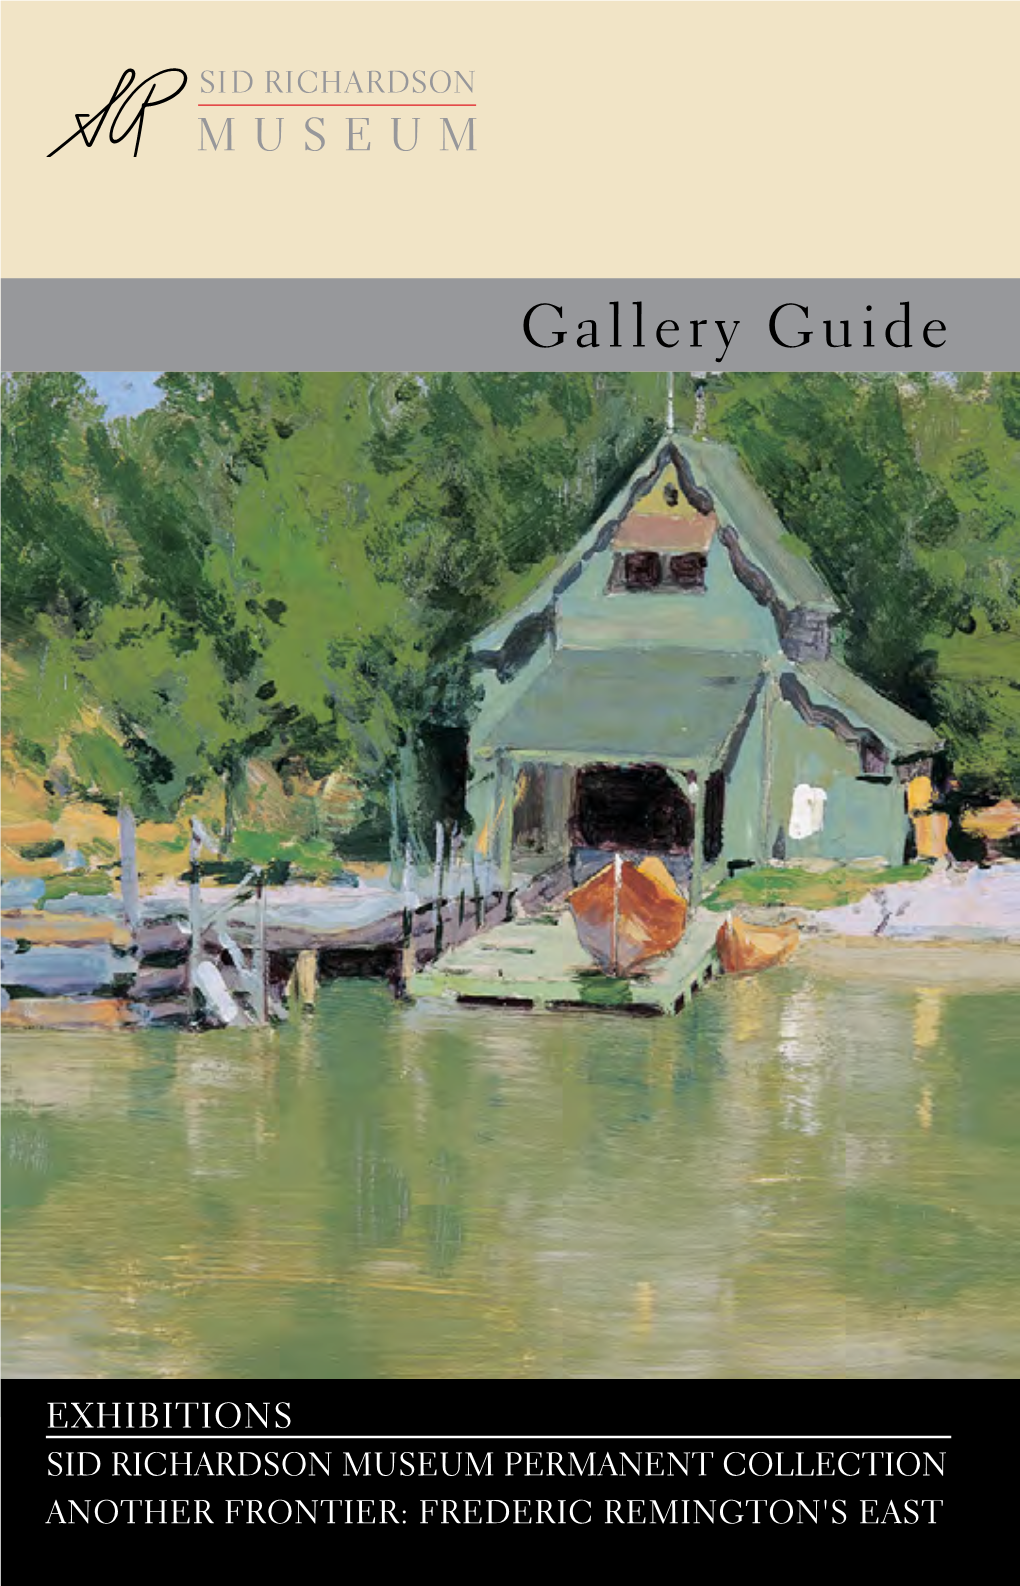 Frederic Remington's East Legacy Exhibition Gallery Guide